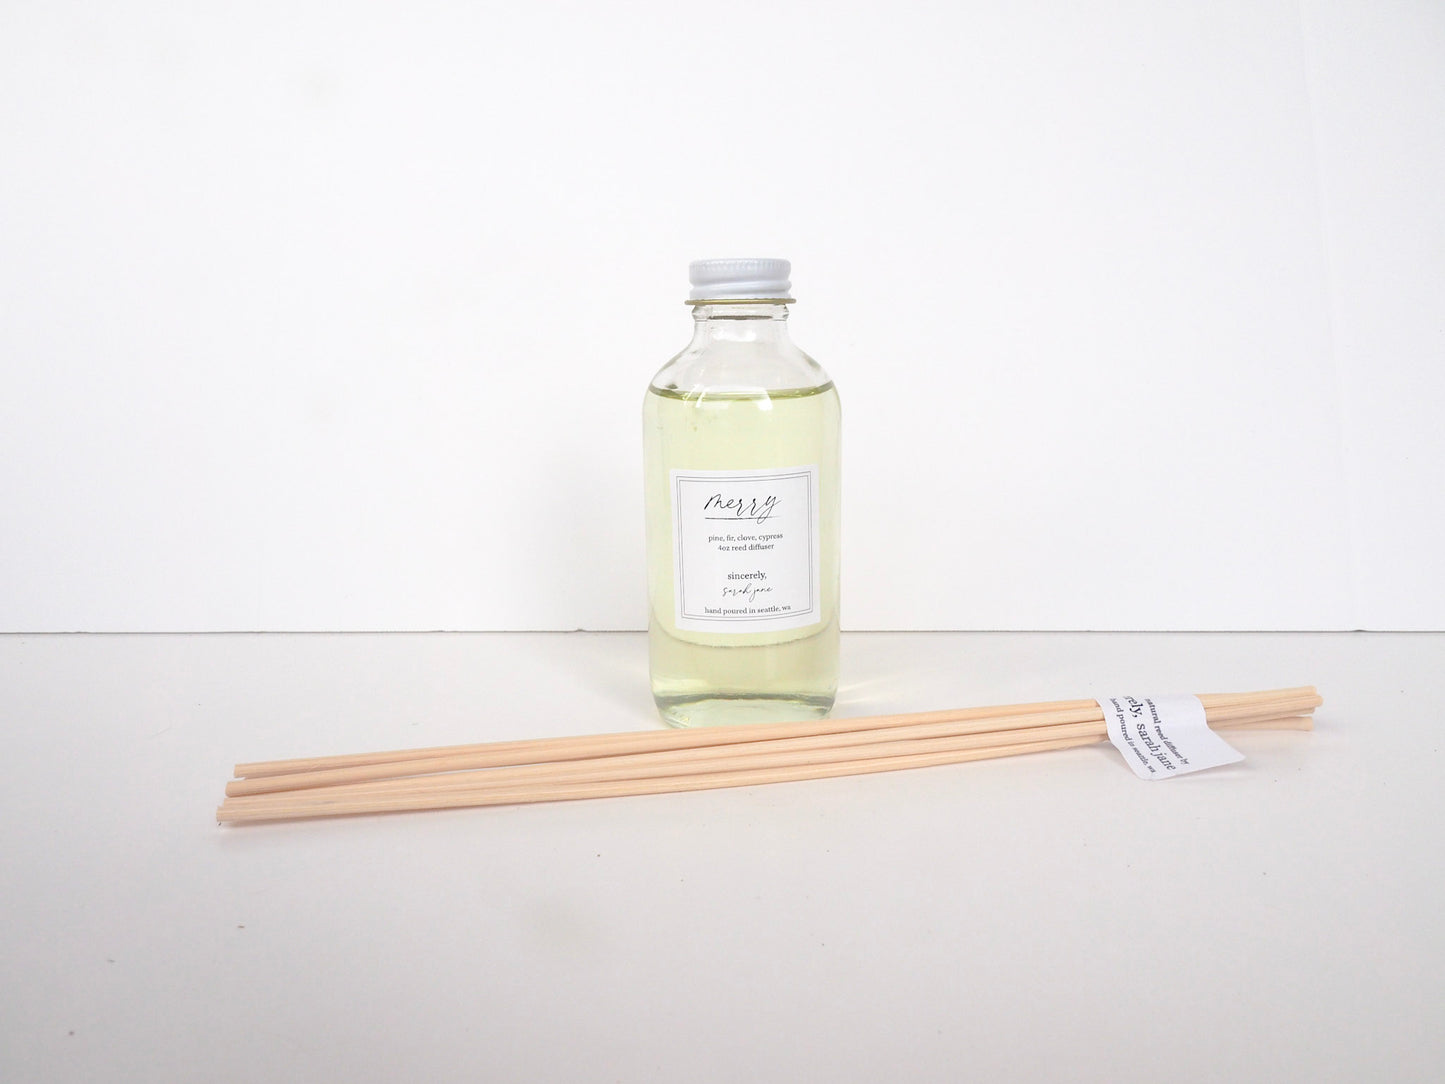 Merry - Cypress, Clove, Pine Natural Reed Diffuser